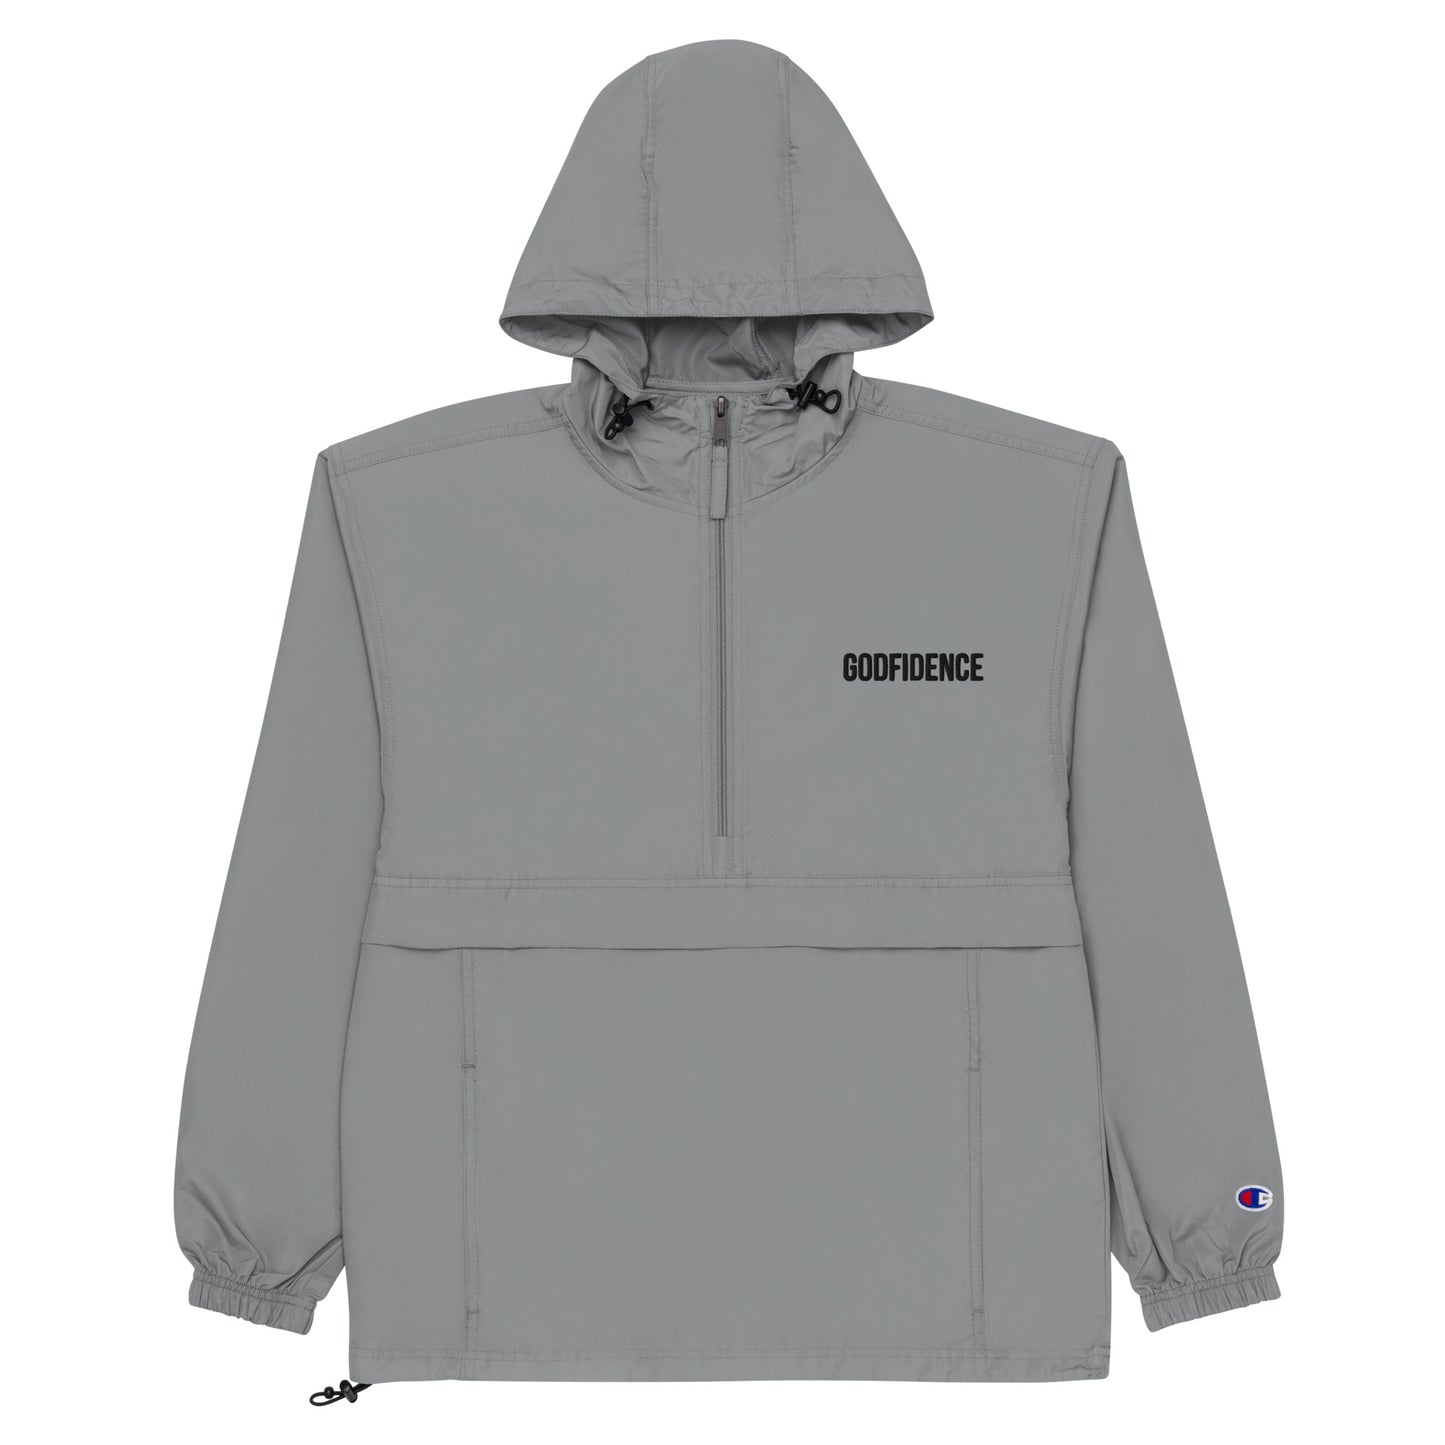 Godfidence Grey Embroidered Champion Packable Jacket